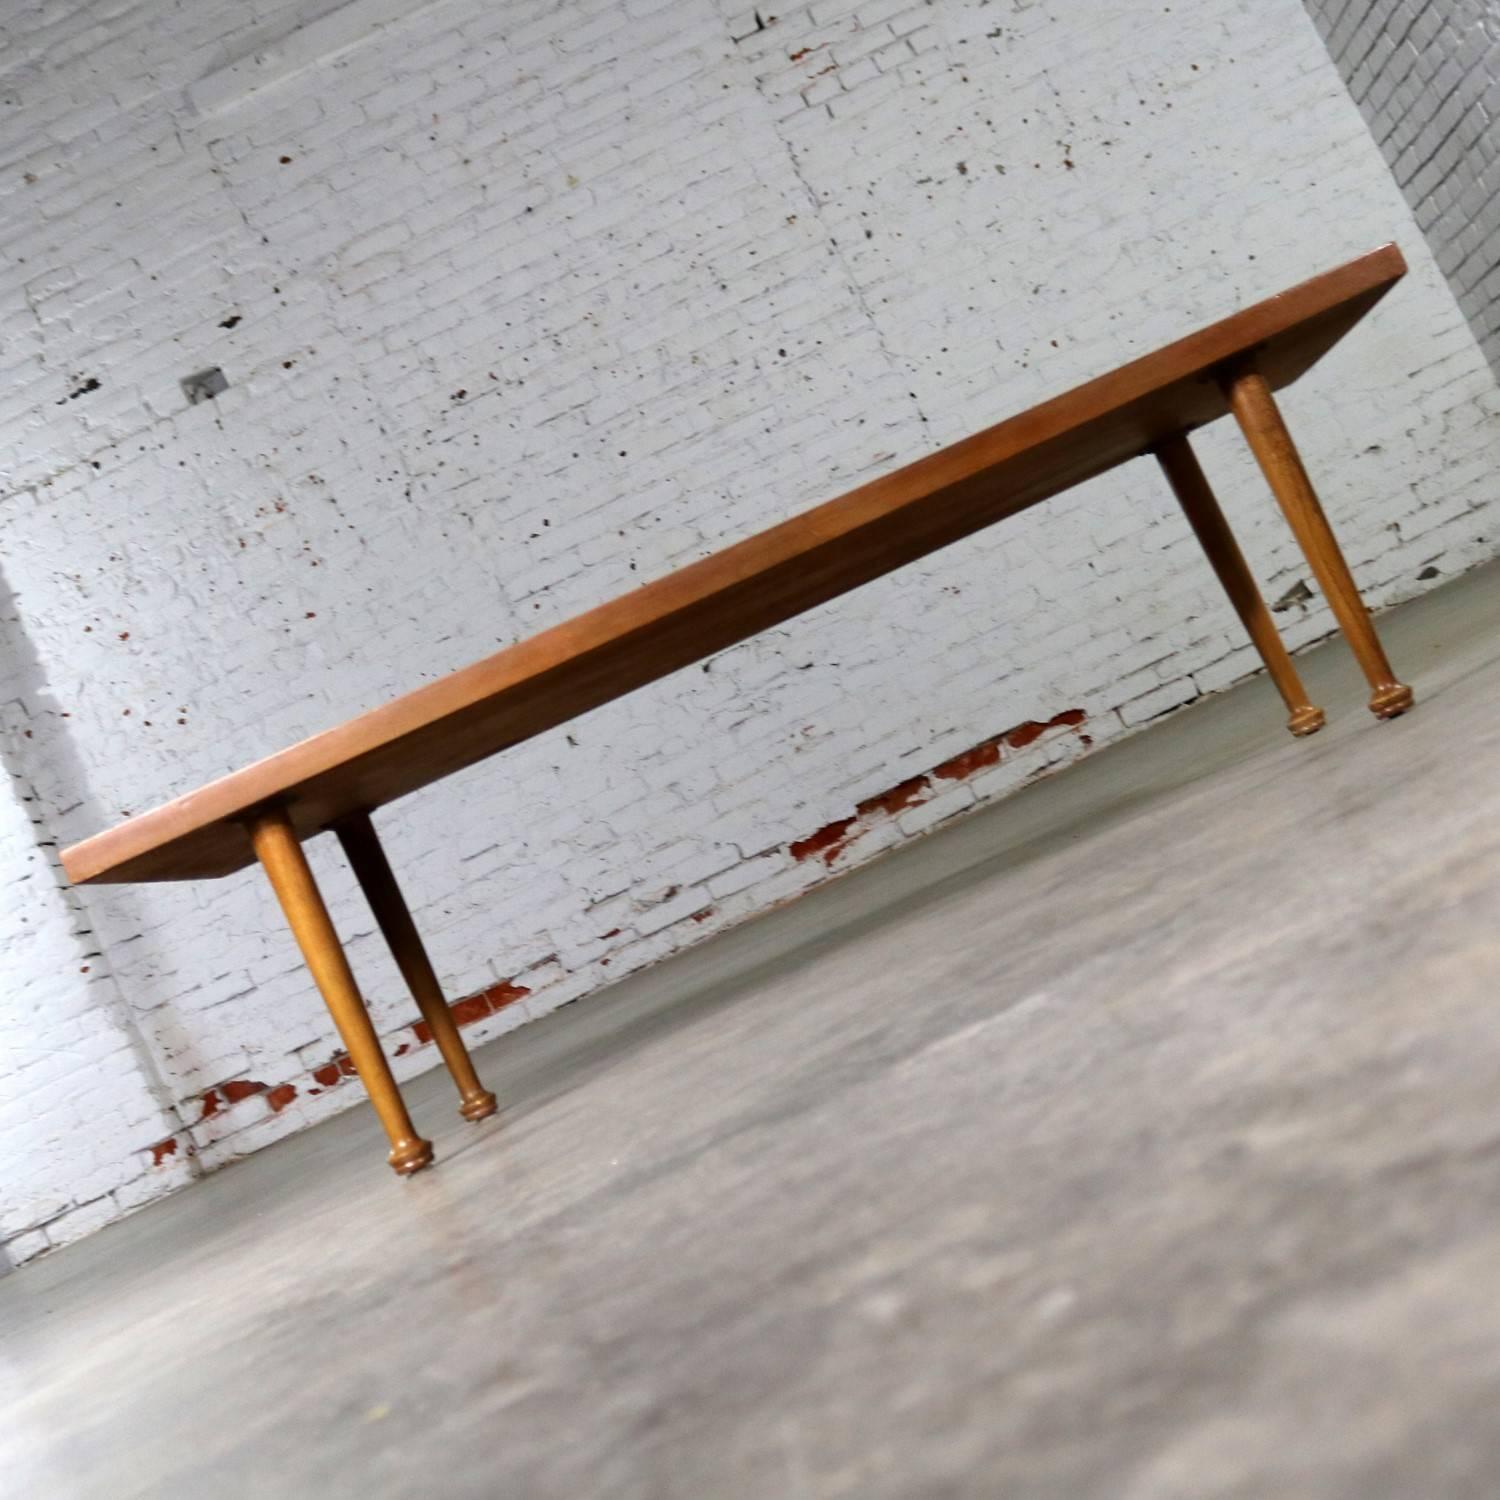 Handsome plank coffee table with wonderful bow tie detail on its top. It is made in the style of the midcentury western furniture maker Brandt Ranch Oak and in fabulous vintage condition, circa 1950s-1960s.

How great is this interesting